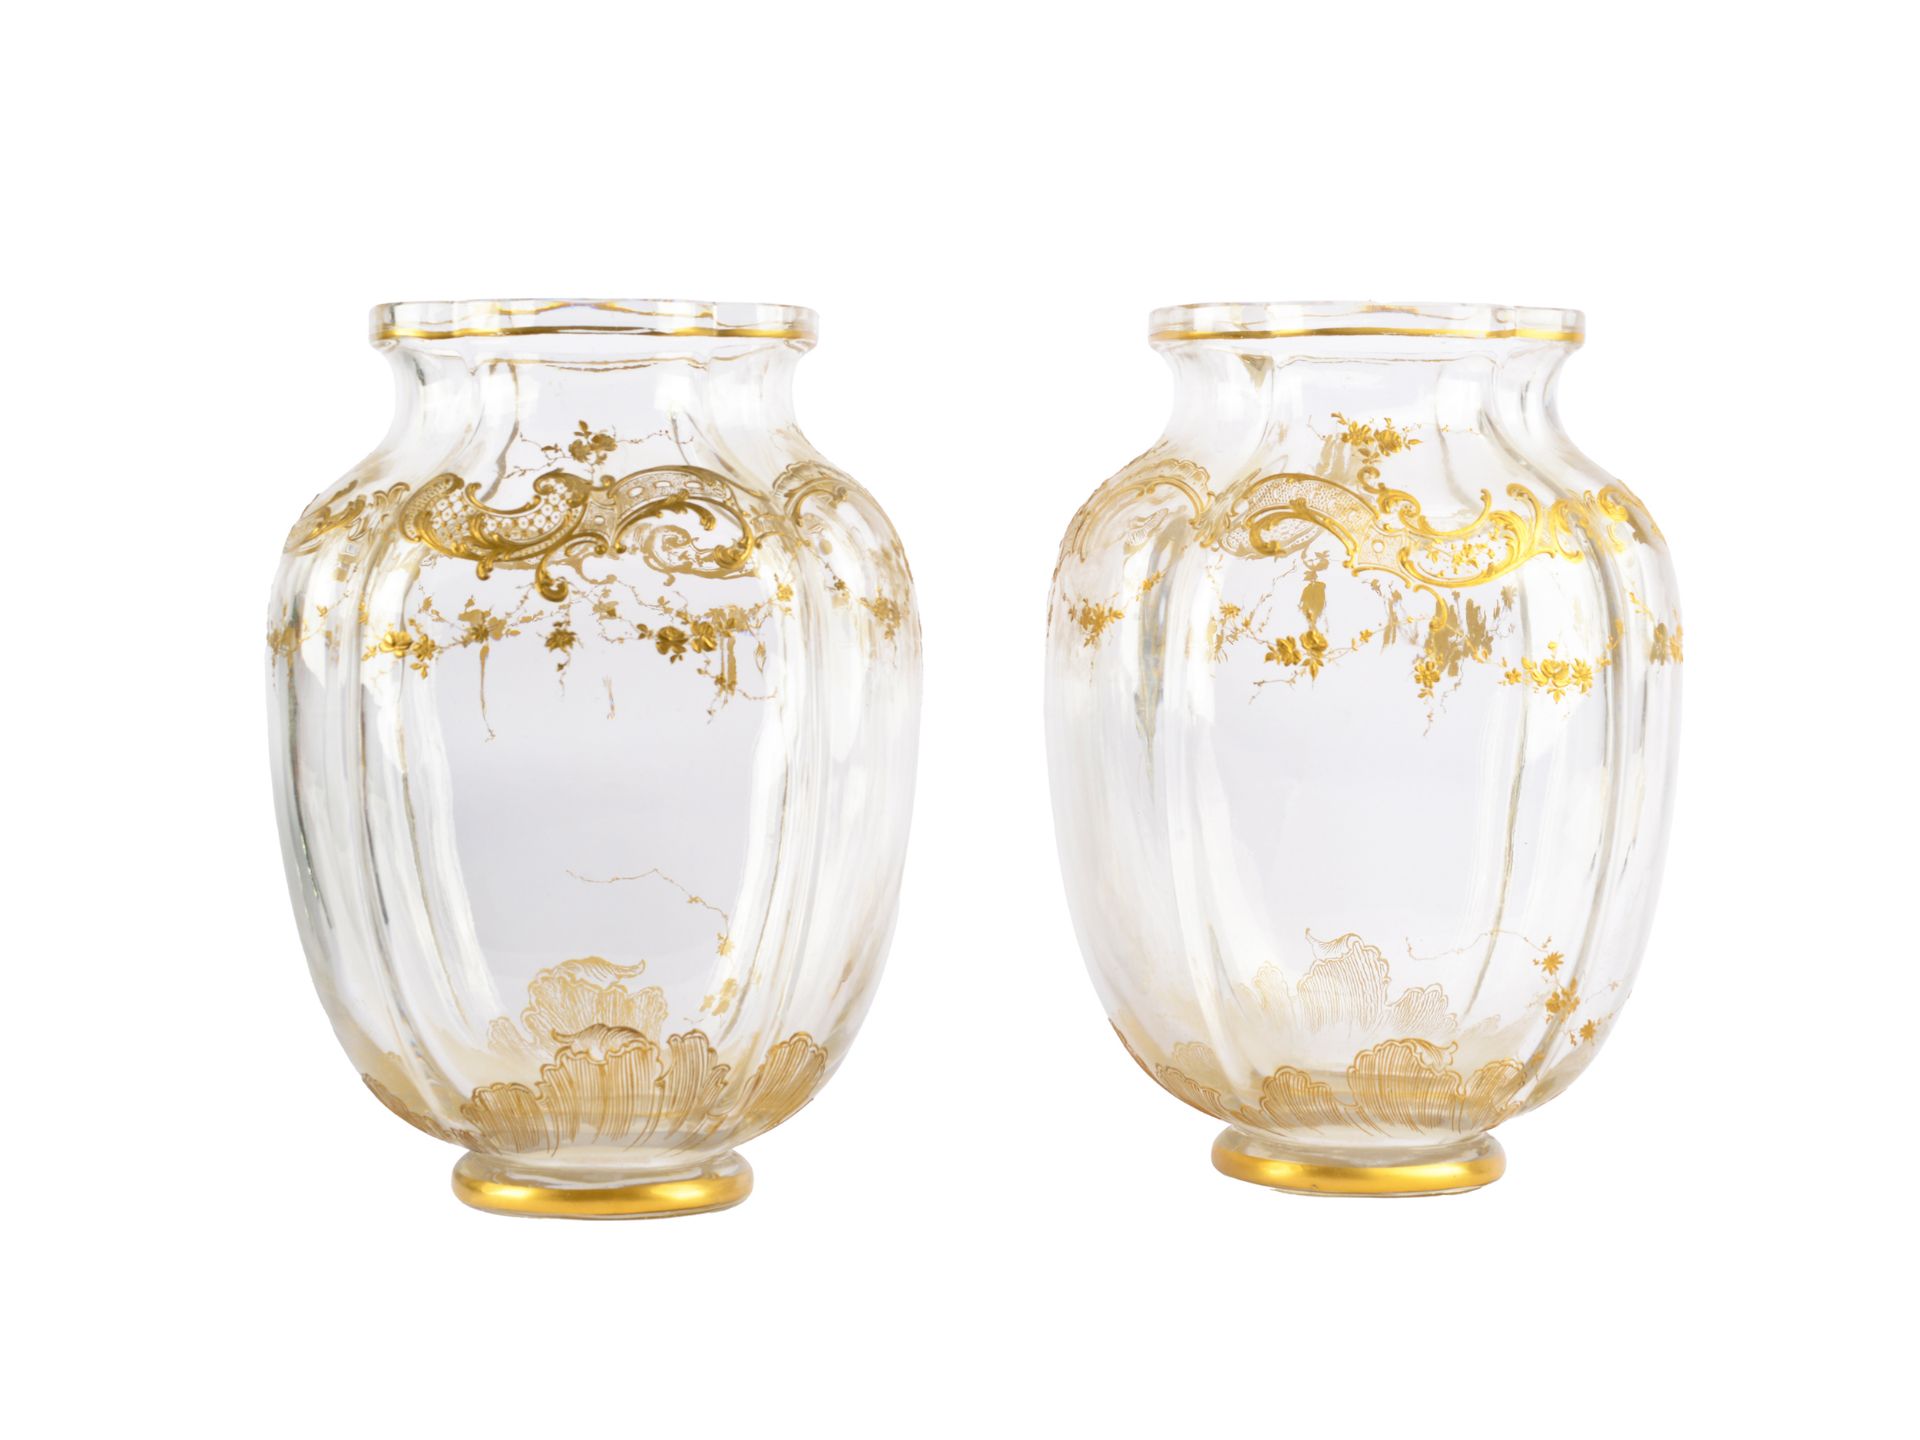 Lobmeyr Vienna, Pair of vases, Colourless glass with gold decoration in relief